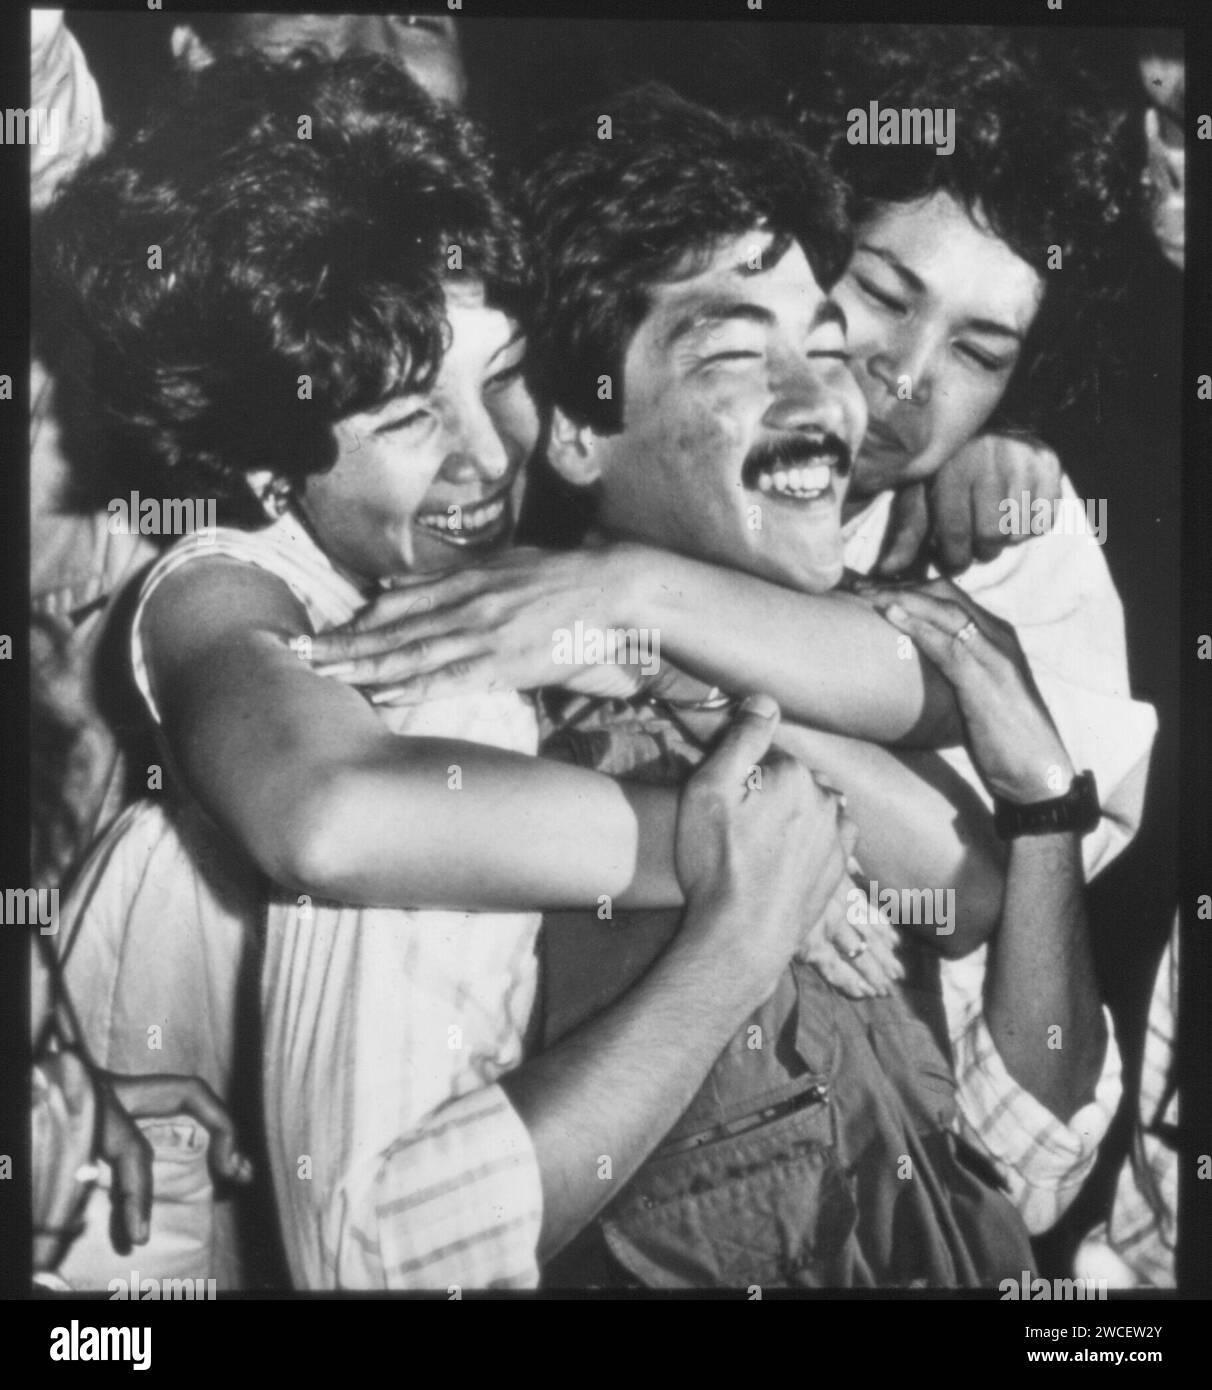 Political prisoners celebrate their release by newly installed President Corazon Aquino. Days earlier, Philippines dictator Ferdinand Marcos was overthrown by the People Power revolution in February 1986. Stock Photo